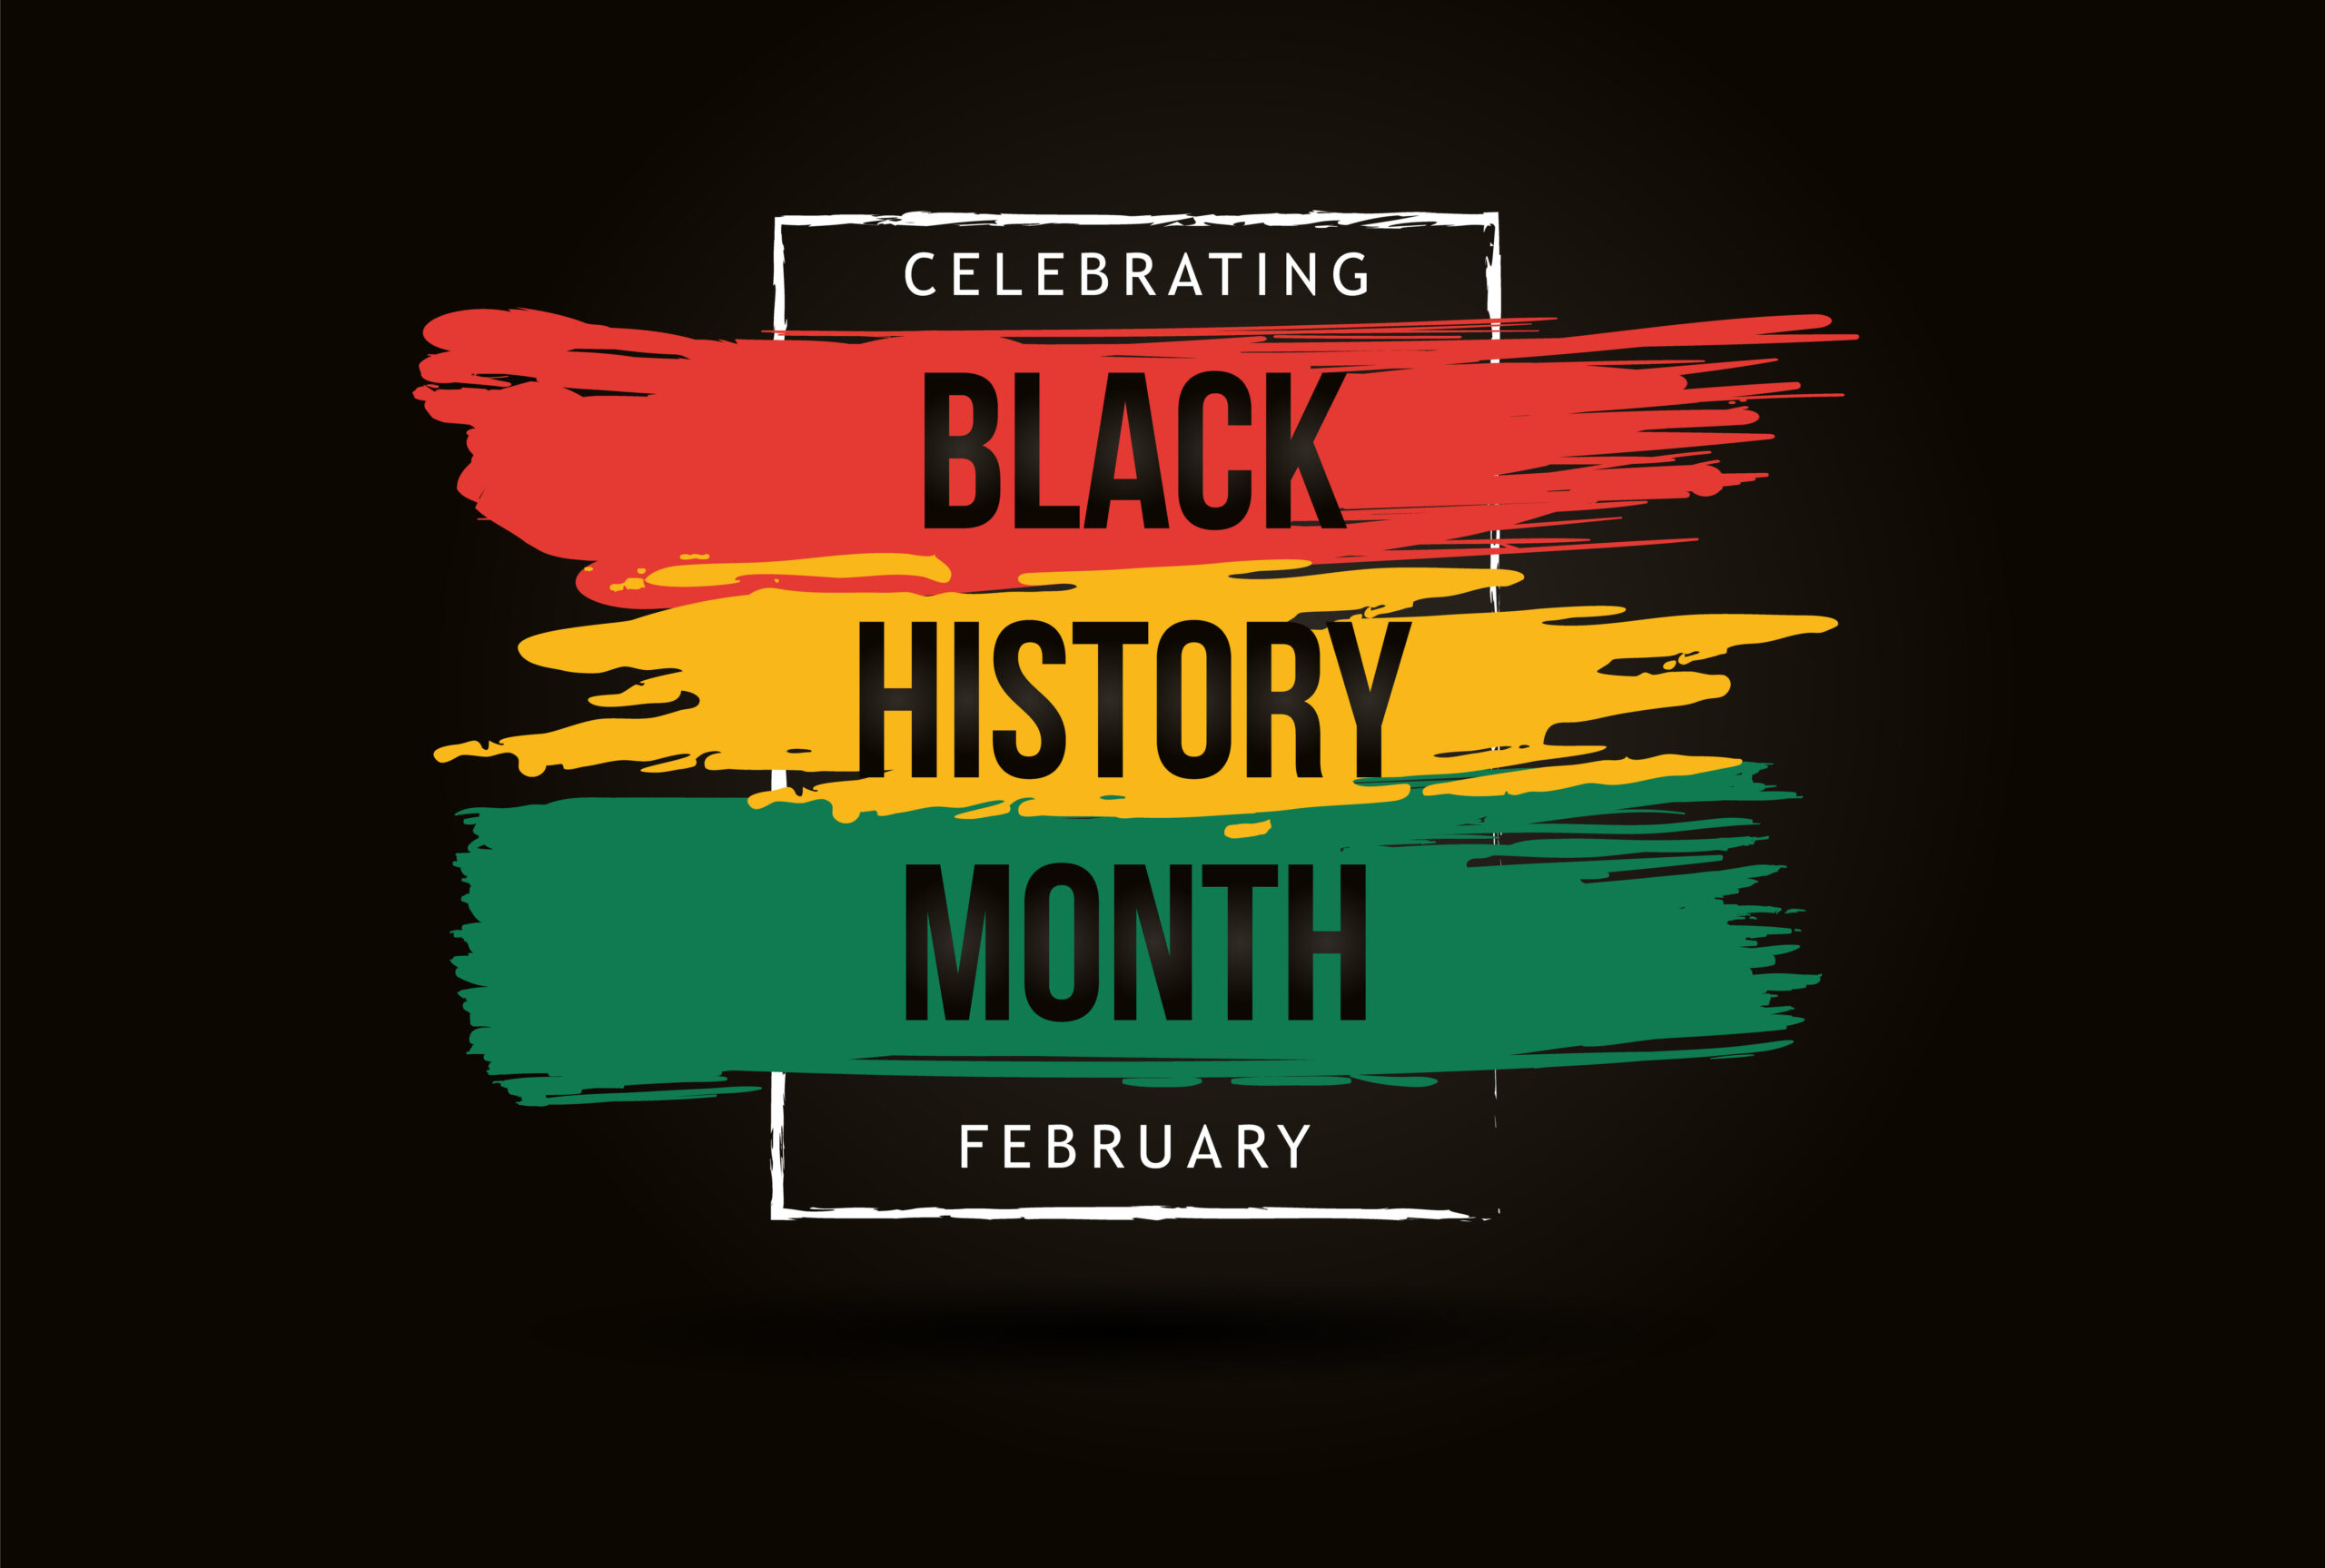 Celebrating Black History Month illustration with red, yellow, and green streaks over a black background